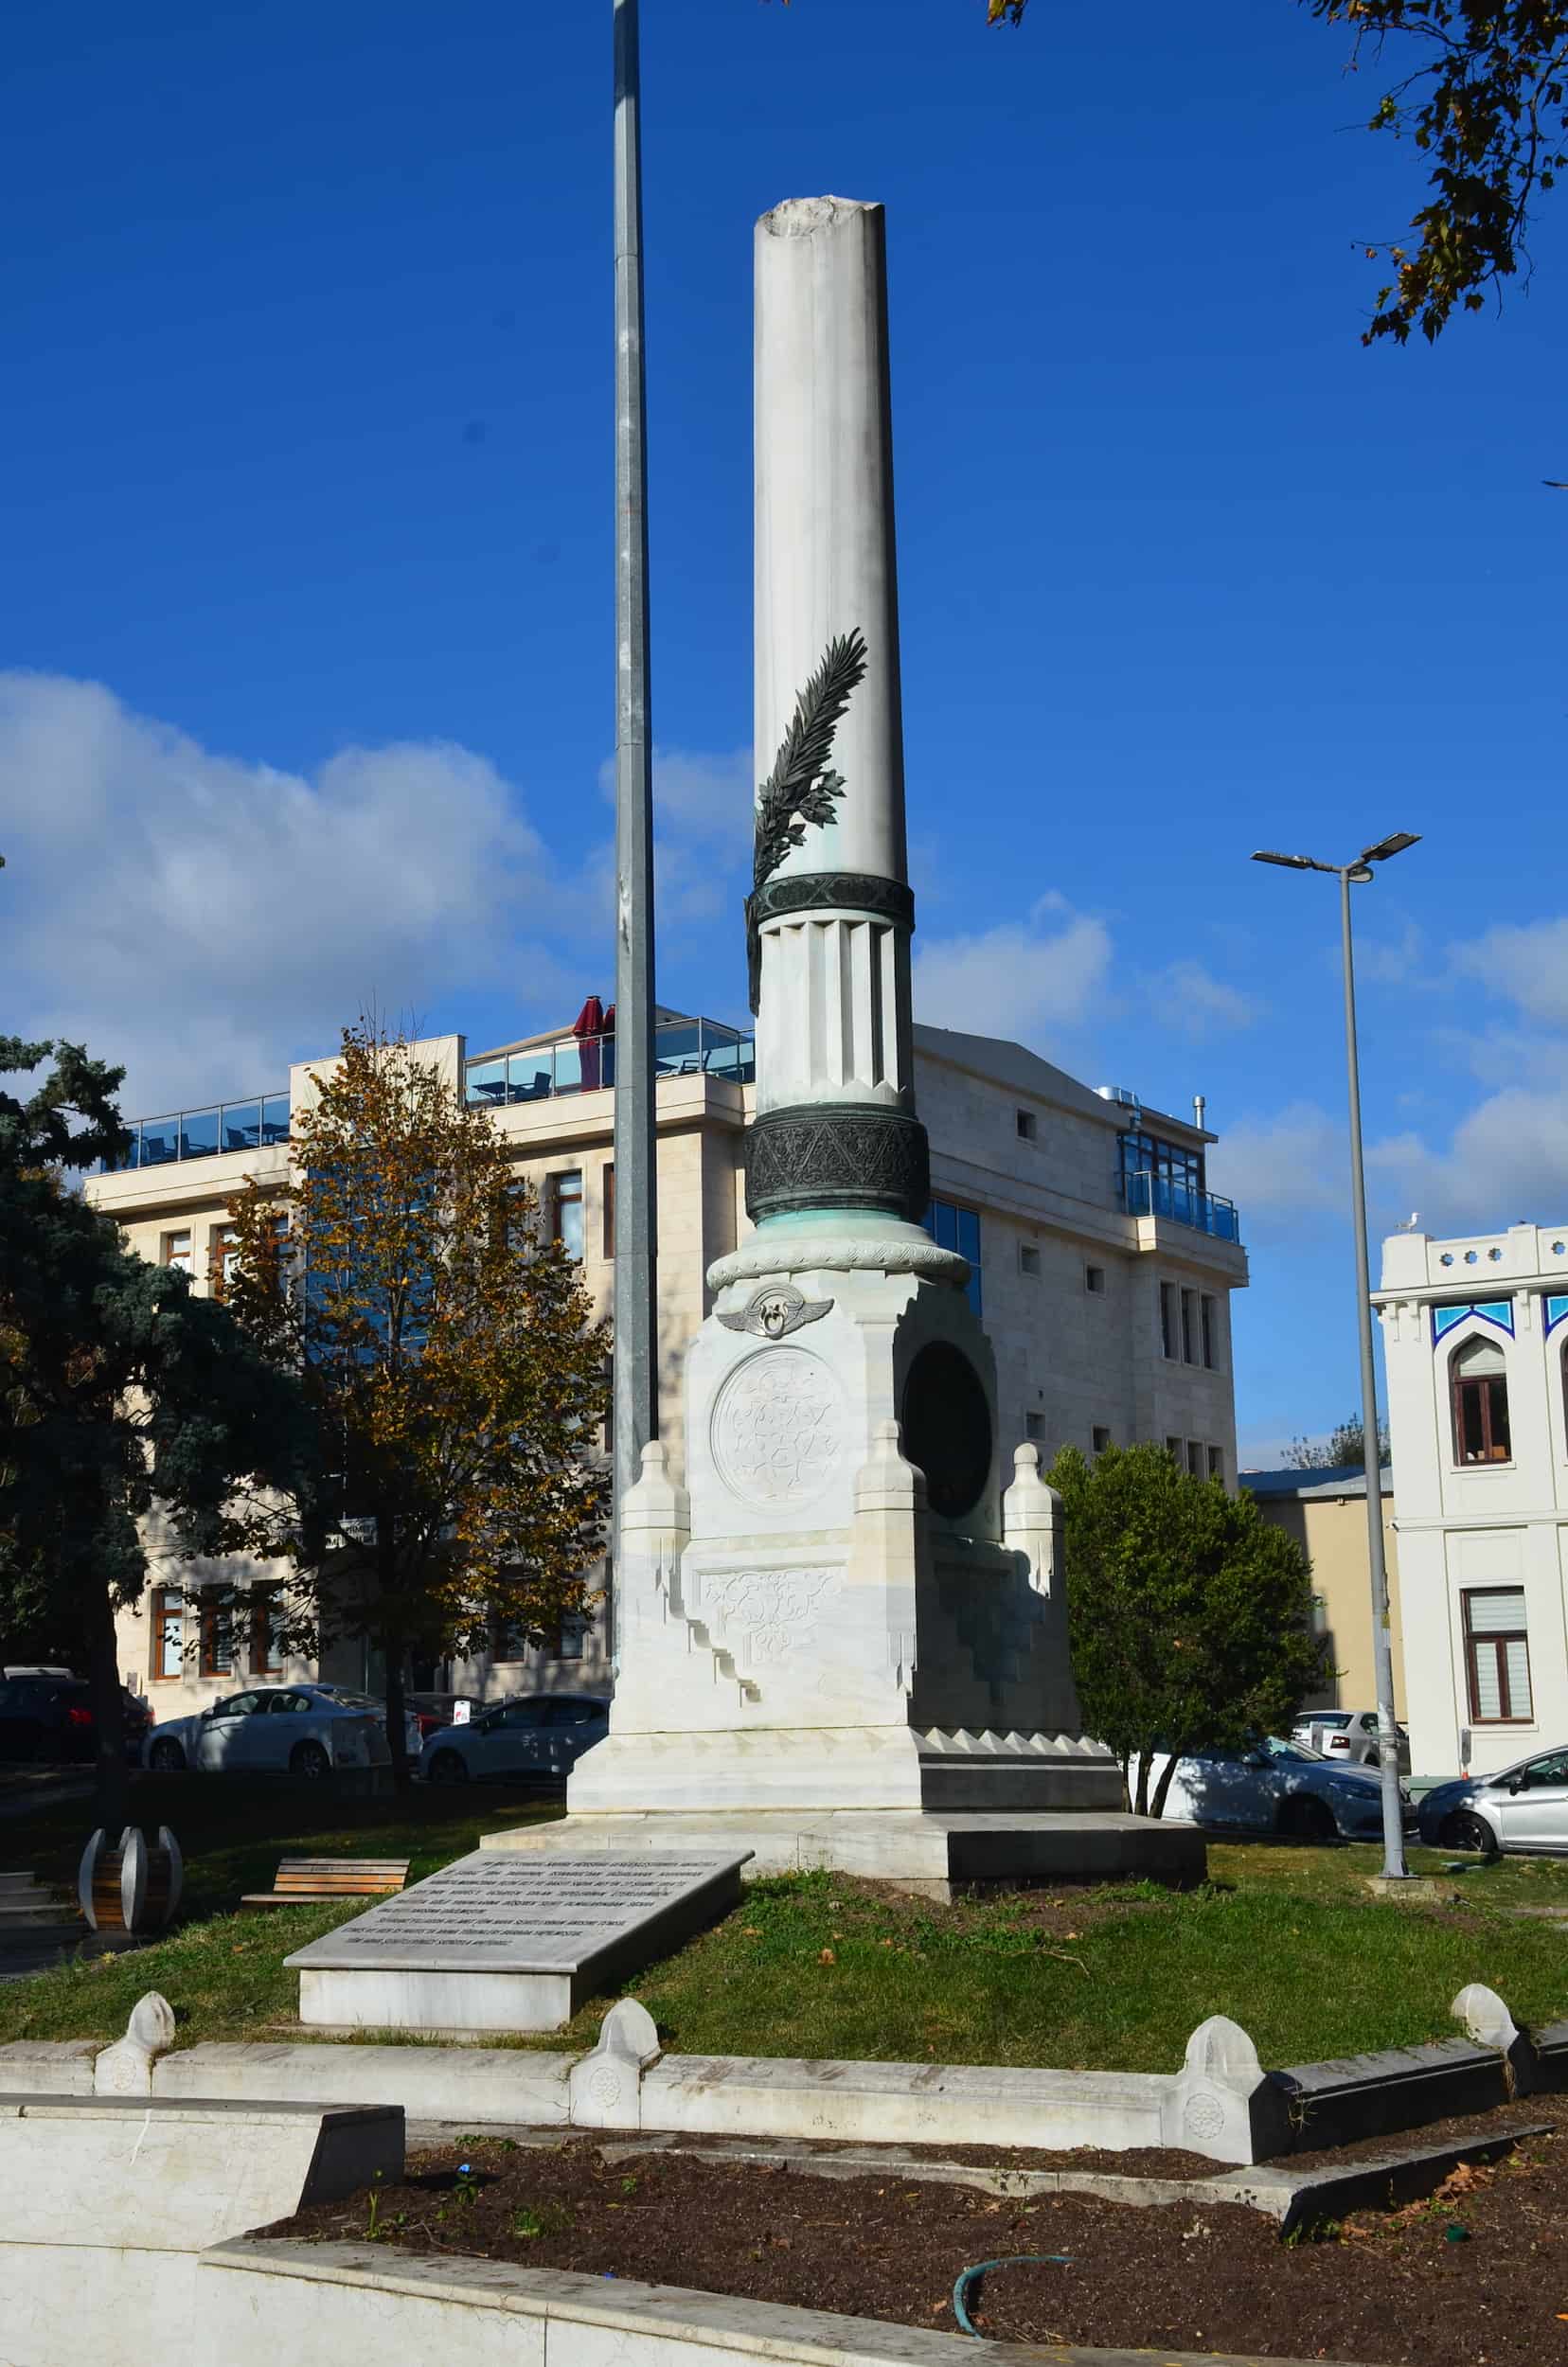 Aviation Martyrs' Monument in Saraçhane, Istanbul, Turkey